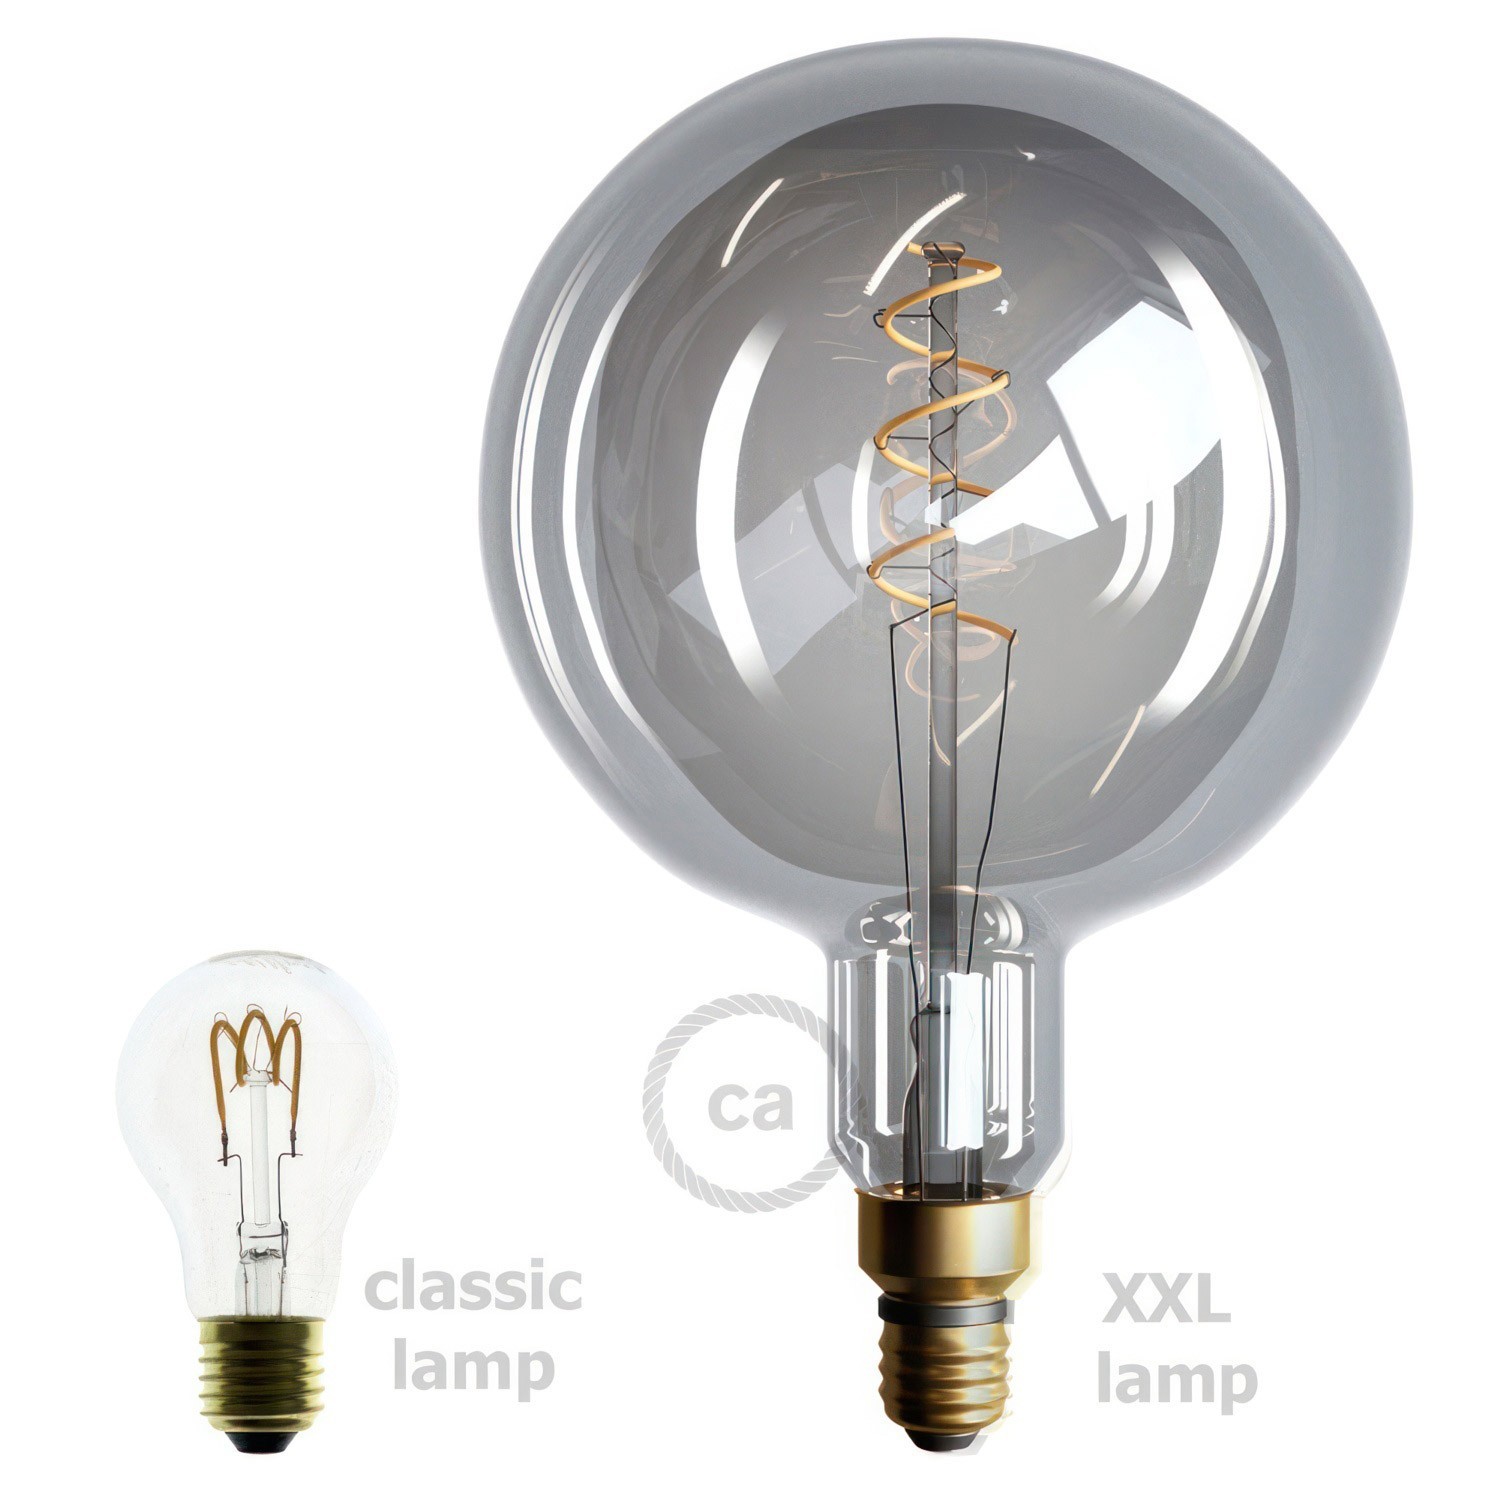 XXL LED Smoky Light Bulb - Sphere G200 Curved Spiral Filament - 5W 80Lm E27 1800K Dimmable